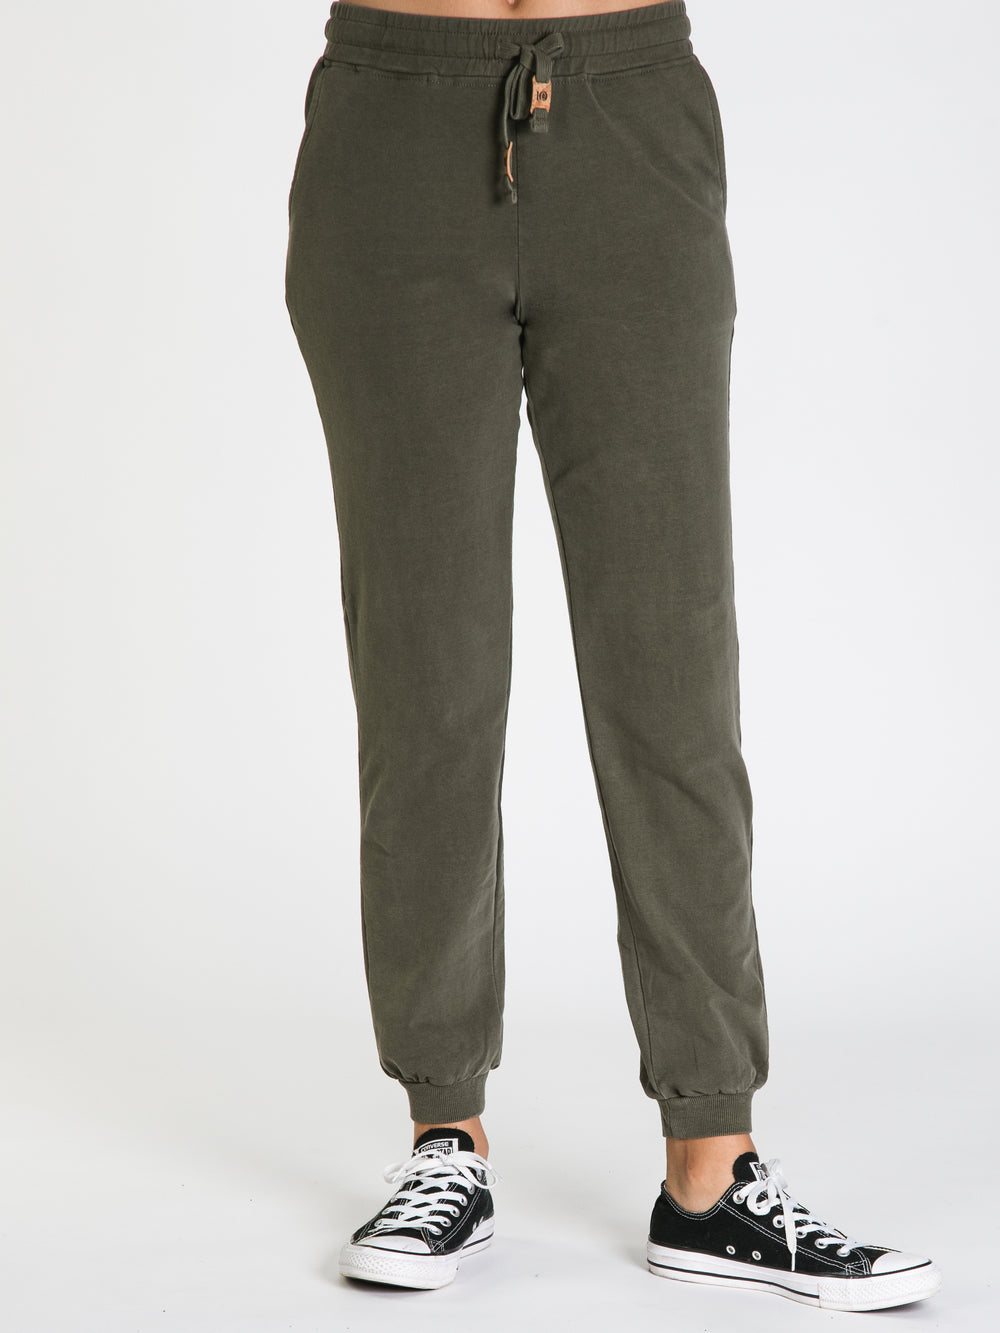 TENTREE FRENCH TERRY FULTON JOGGER  - CLEARANCE